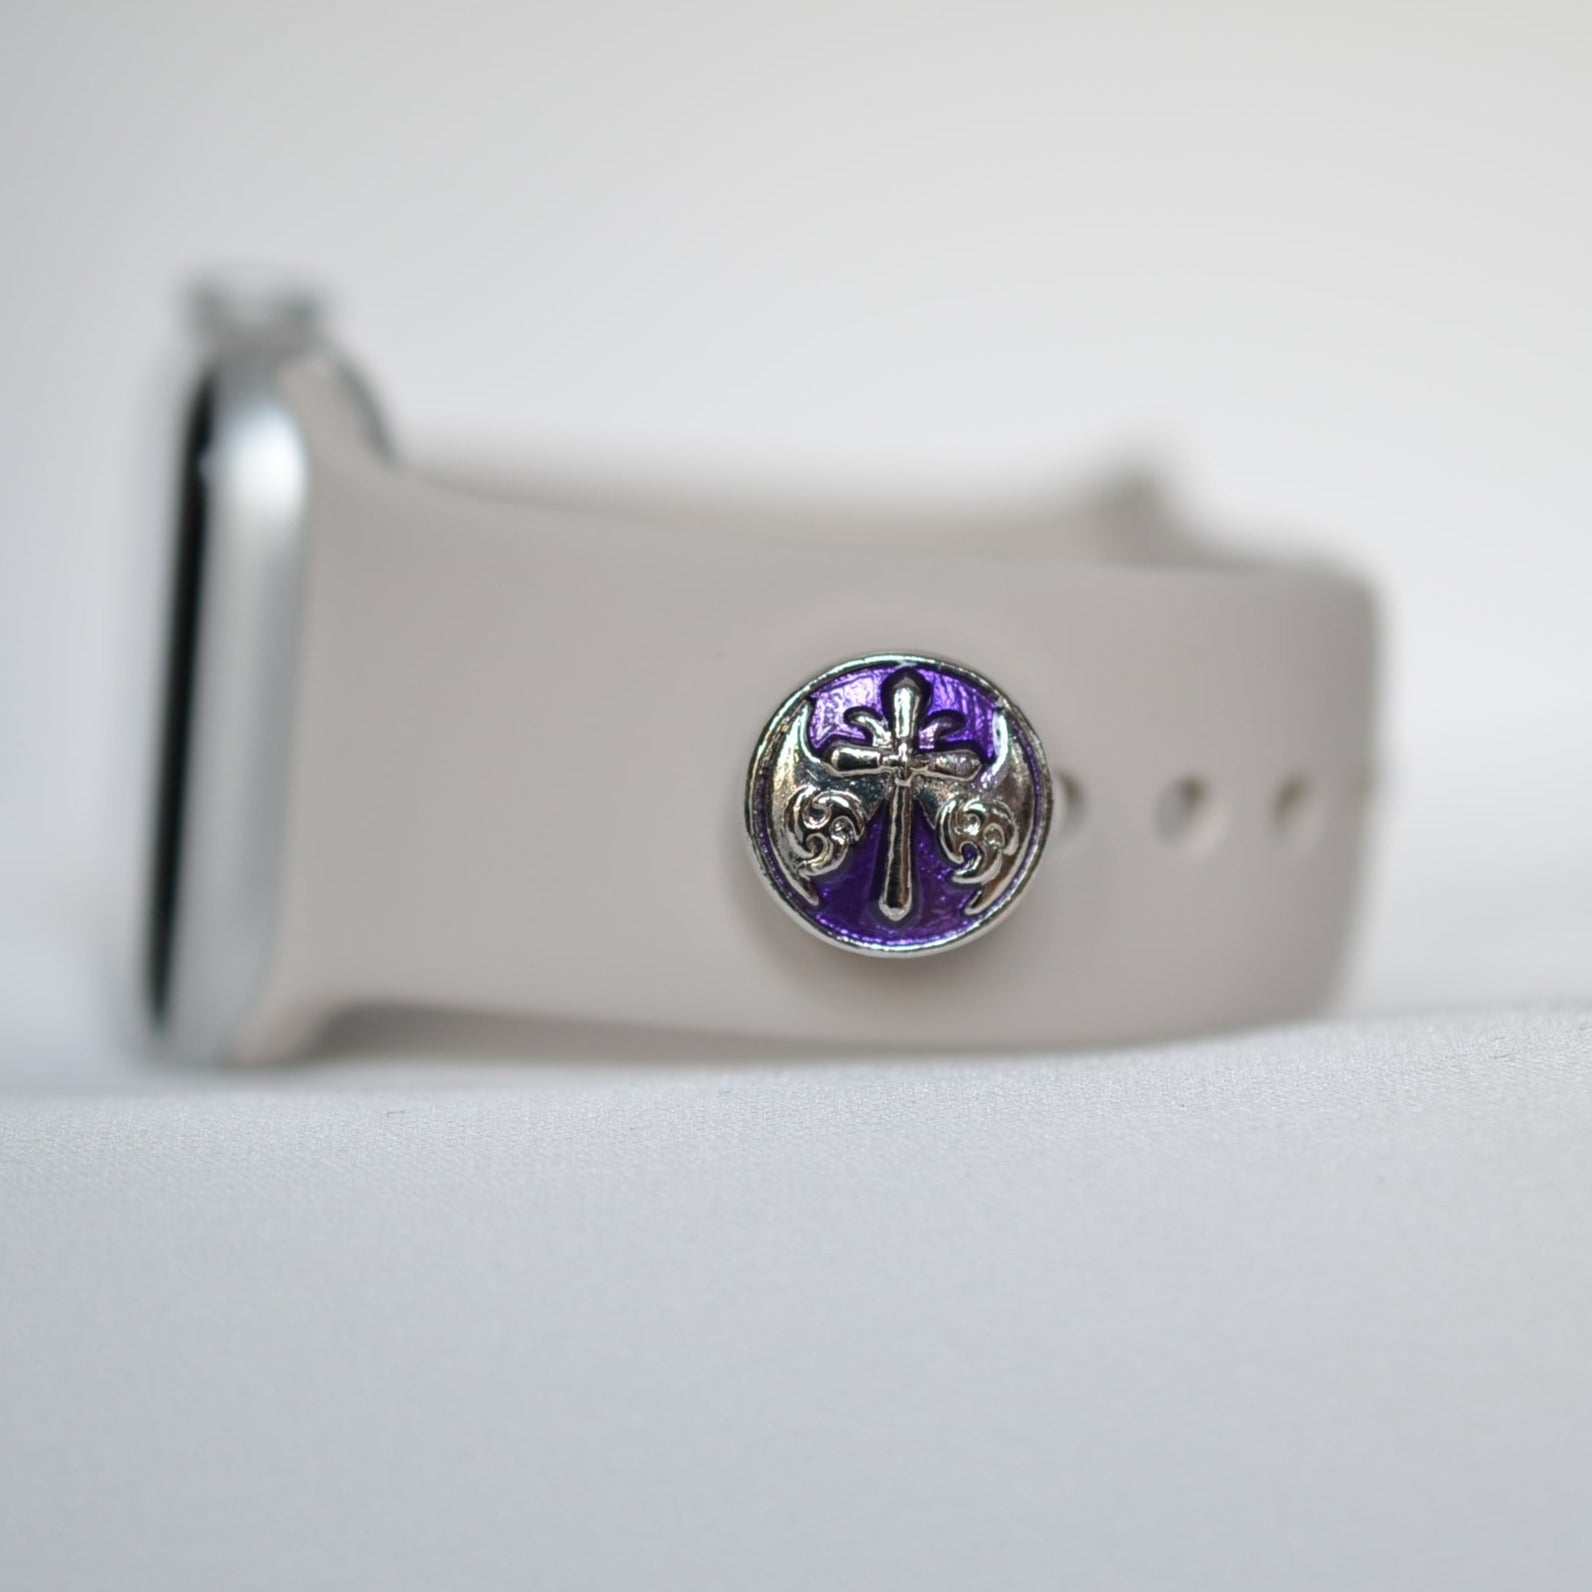 Purple Cross Charm for Belts, Bags and Watch Band Charms